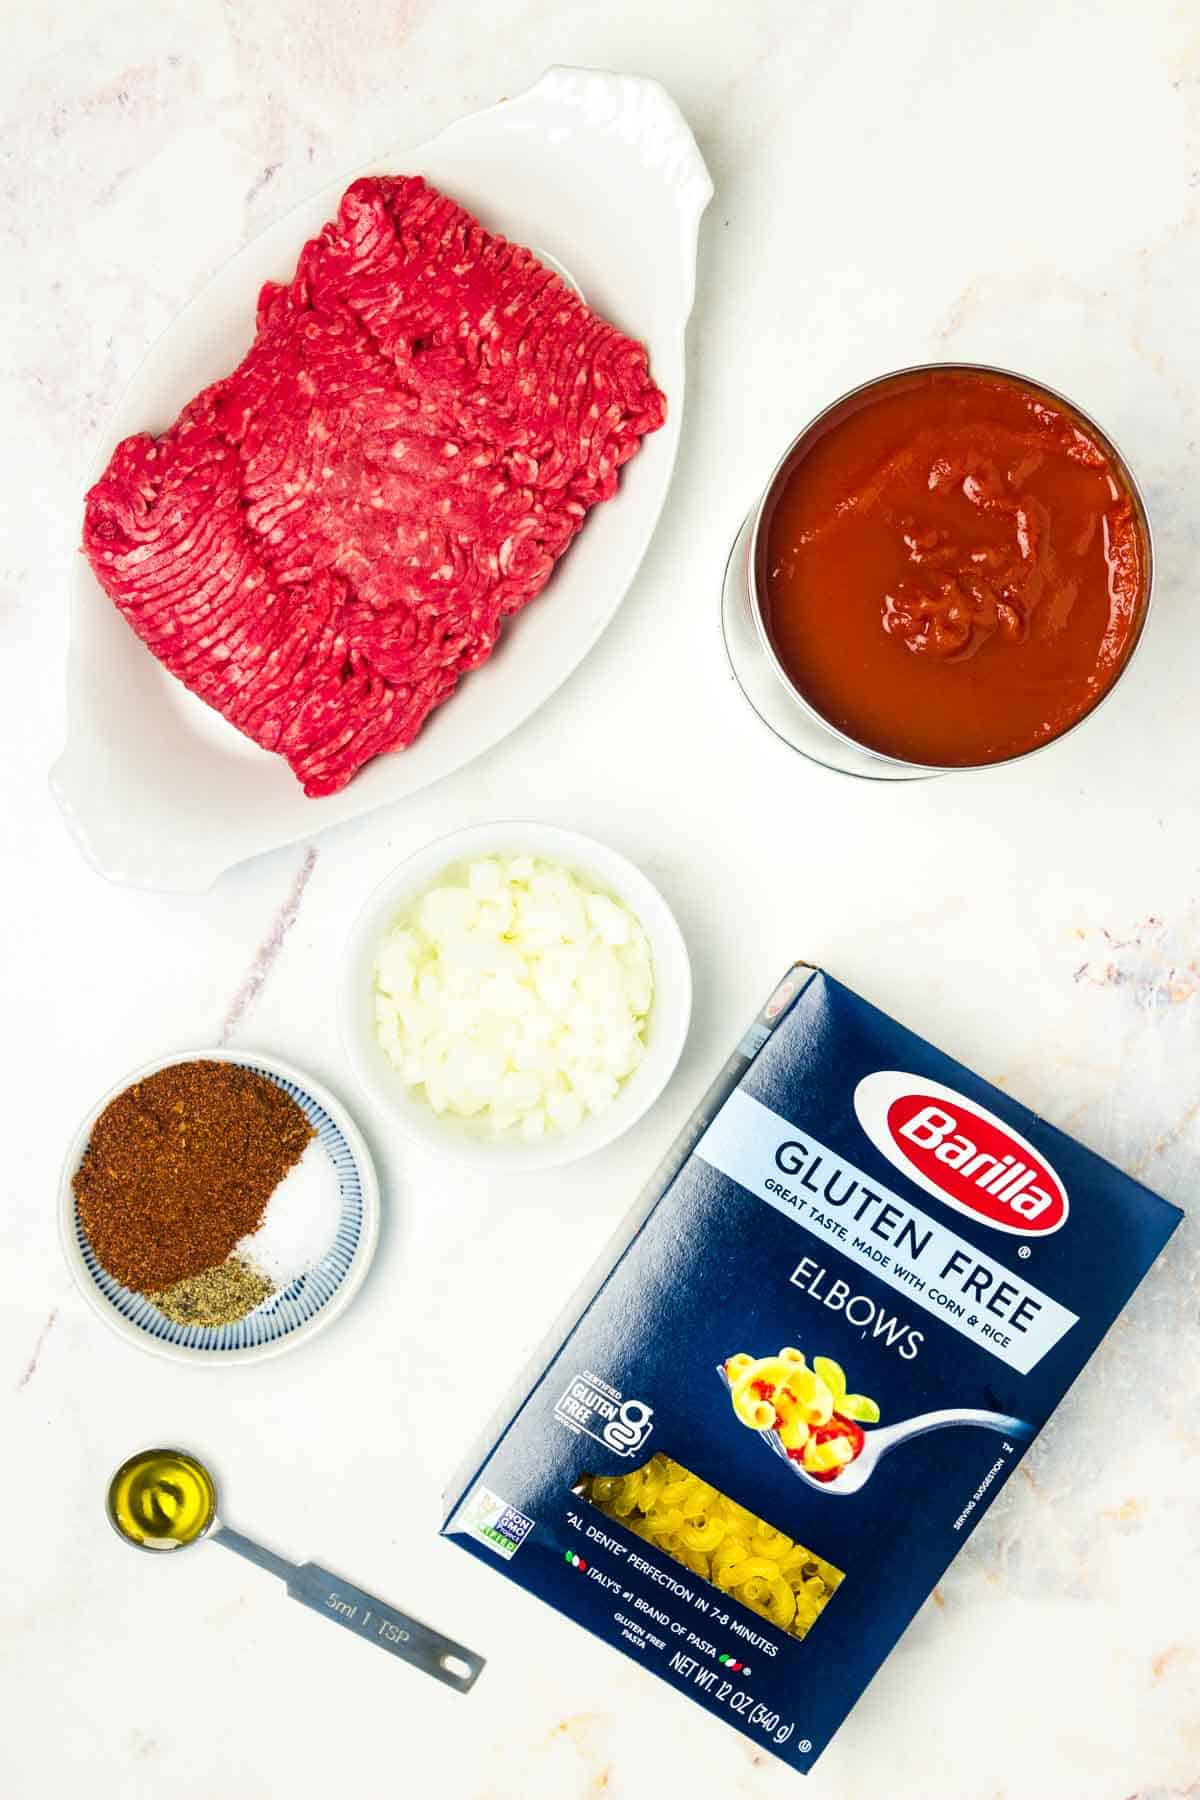 The ingredients for beefaroni are shown portioned out: ground beef, onion, garlic, gluten free elbows, tomato sauce, olive oil, chili powder, salt and pepper.